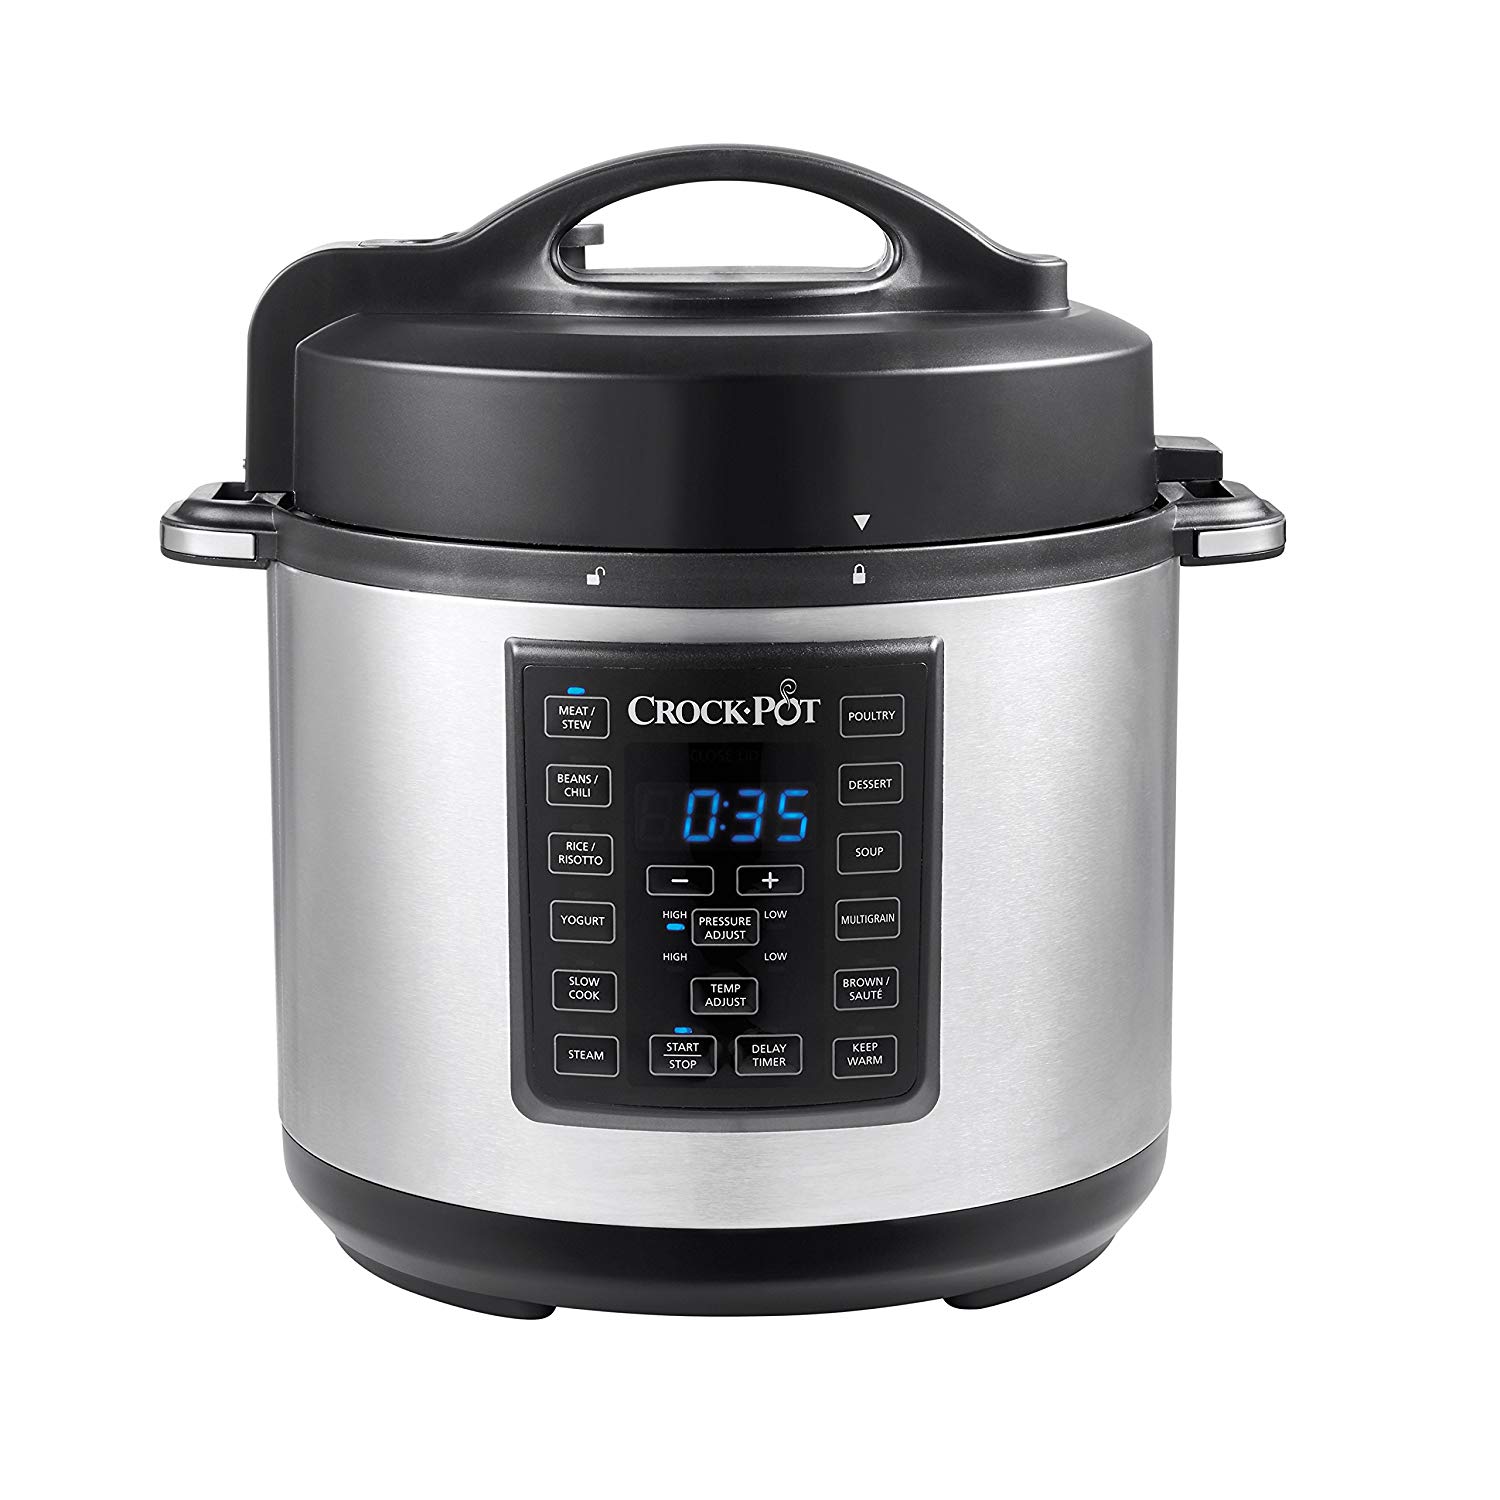 Crock-Pot 6 Qt 8-in-1 Multi-Use Express Pressure Cooker, Stainless Steel - image 1 of 11